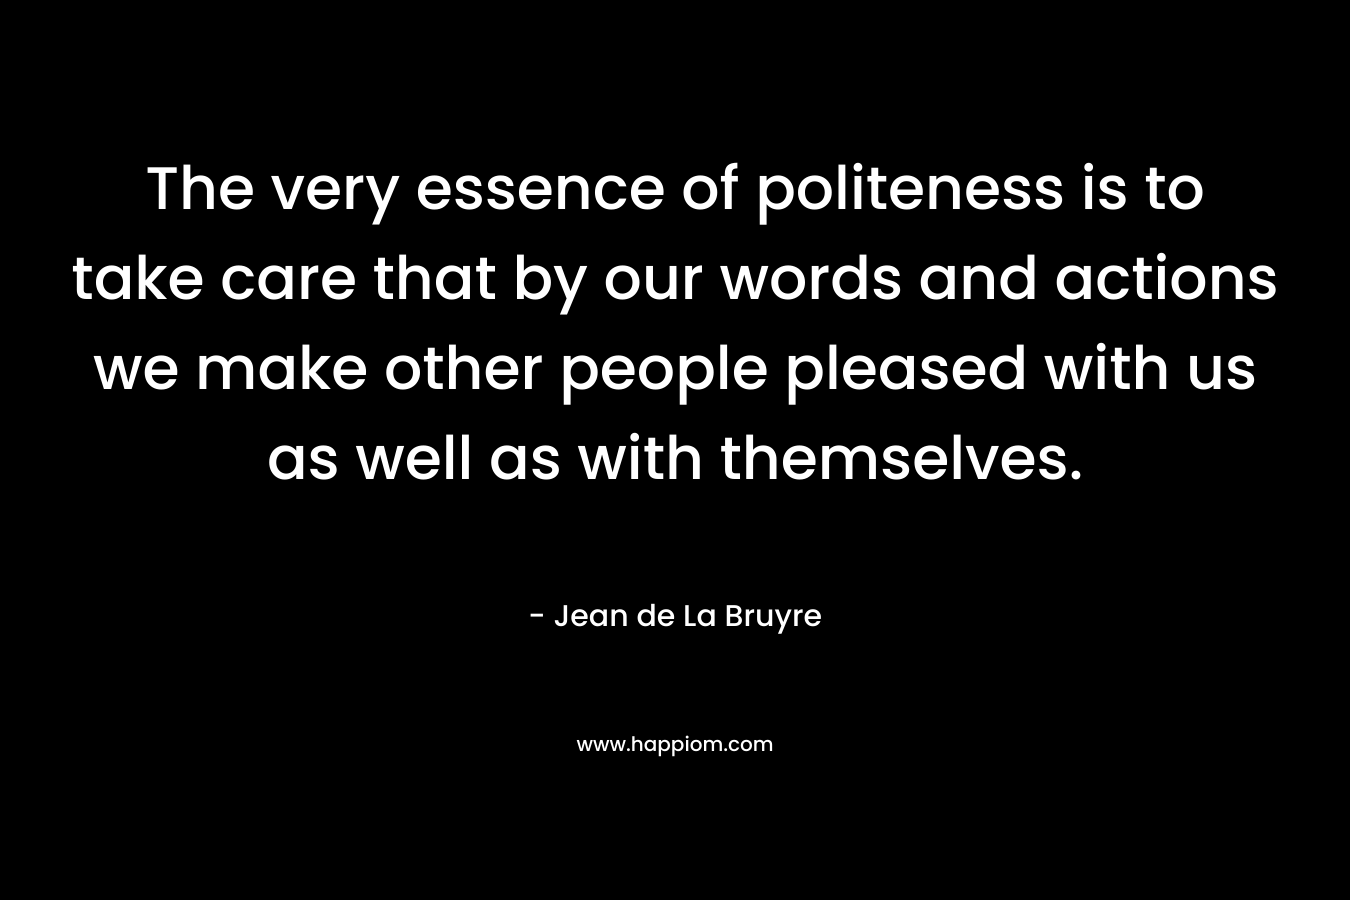 The very essence of politeness is to take care that by our words and actions we make other people pleased with us as well as with themselves. – Jean de La Bruyre